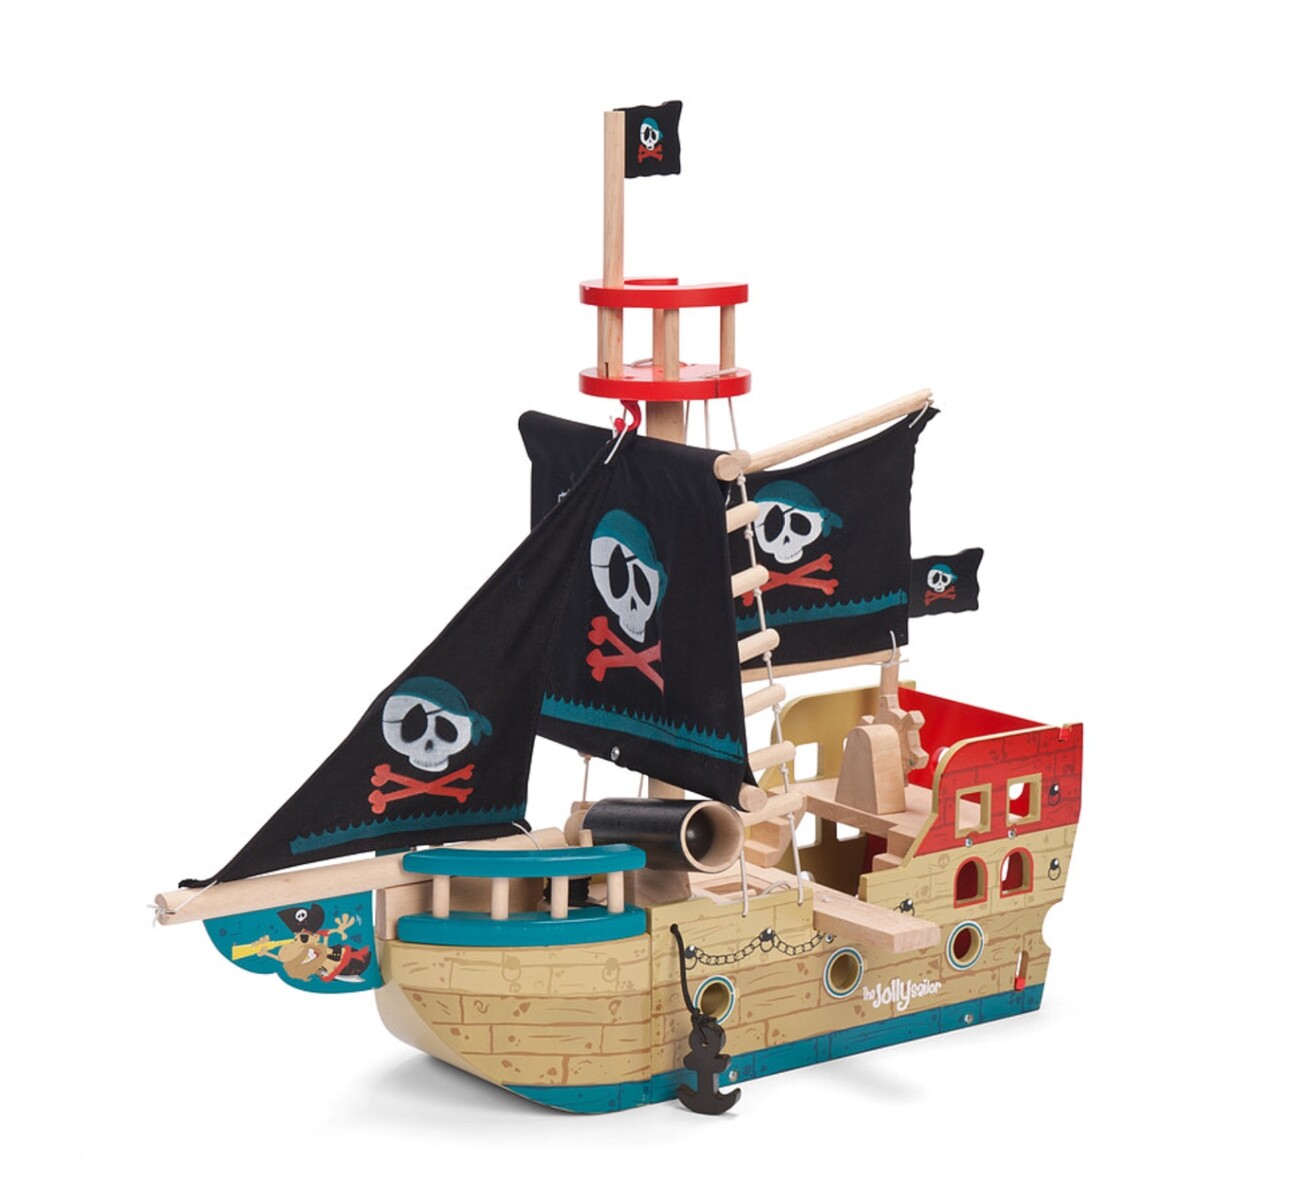 JOLLY PIRATE SHIP –  WOODEN PIRATE SHIP – LE TOY VAN